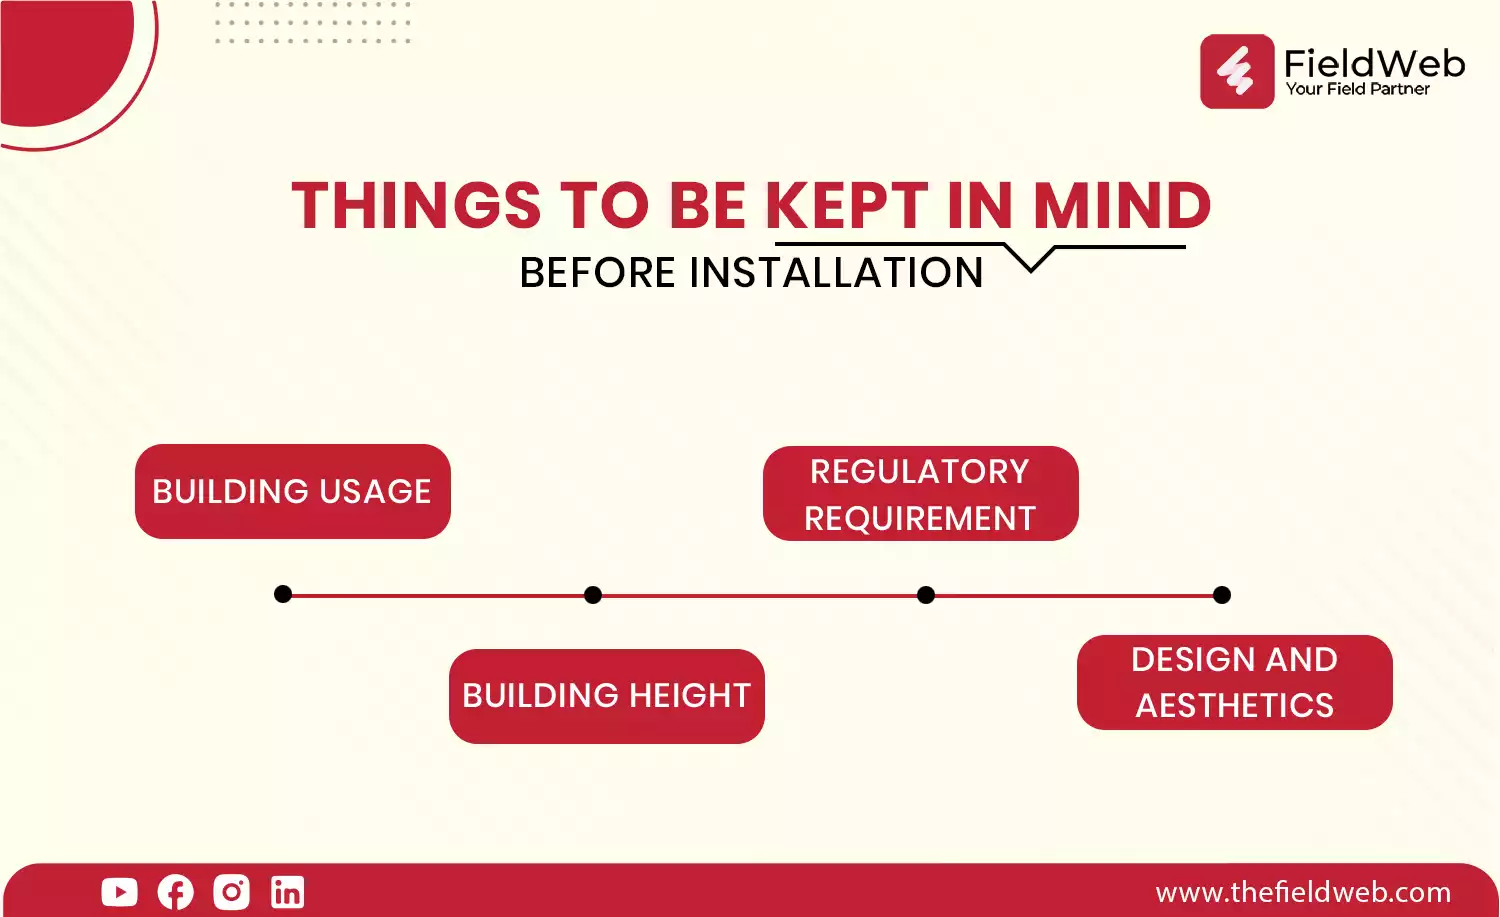 Things to be kept in mind before installation